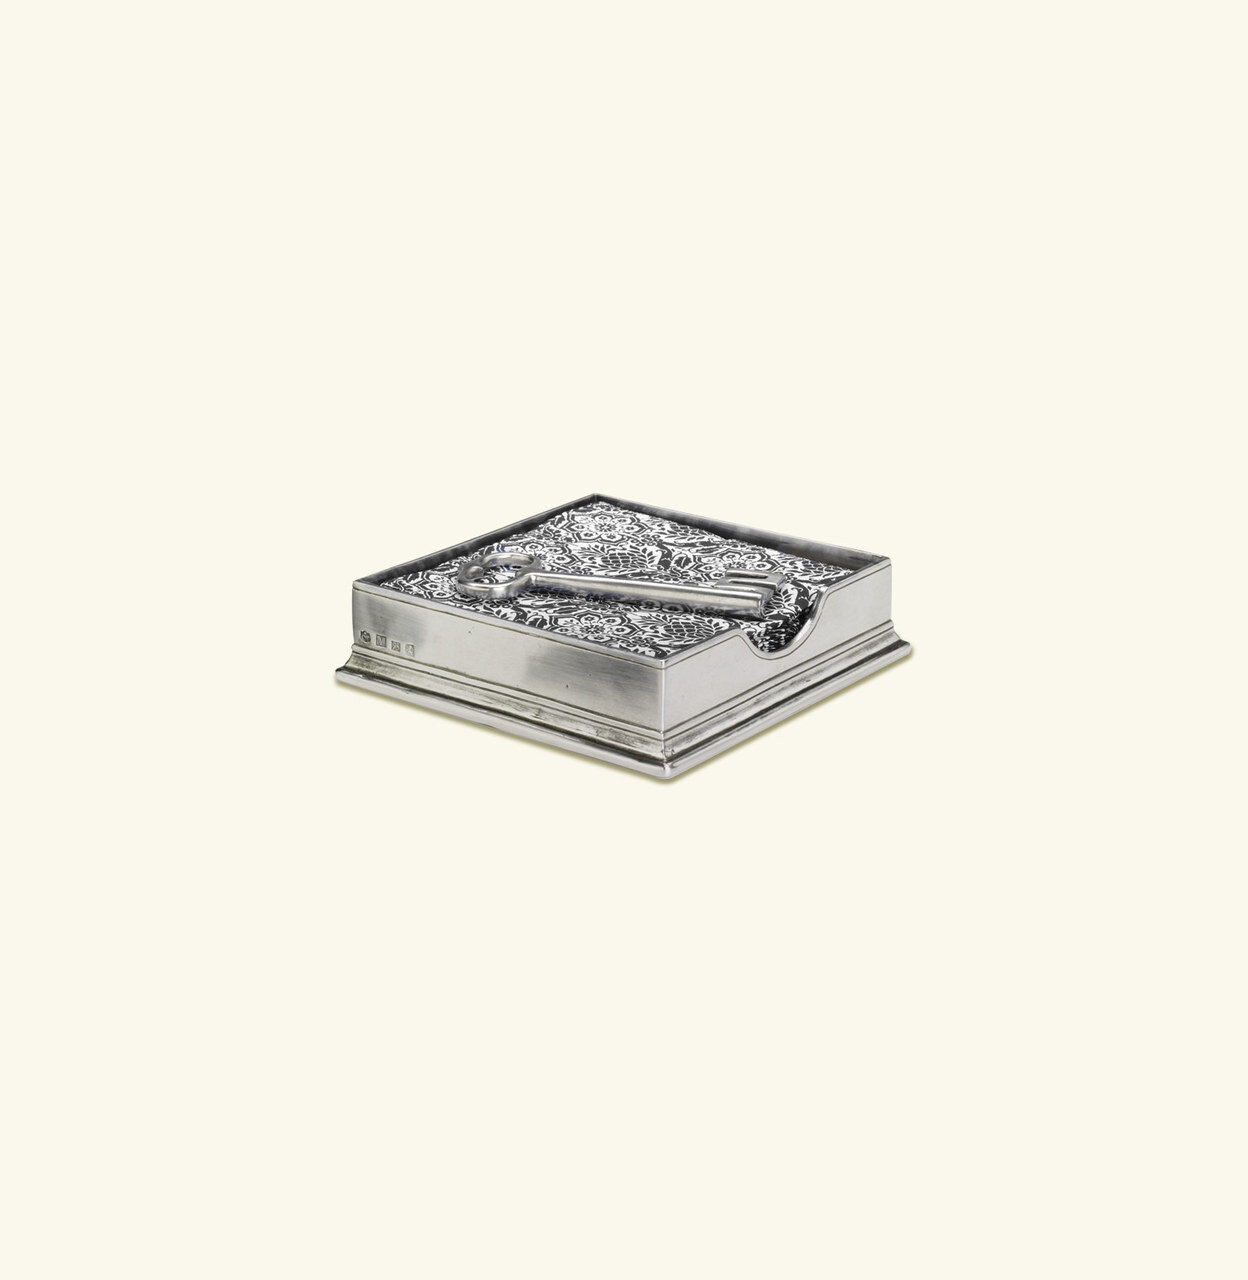 Match Pewter Cocktail Napkin Box With Key Weight 1281.1